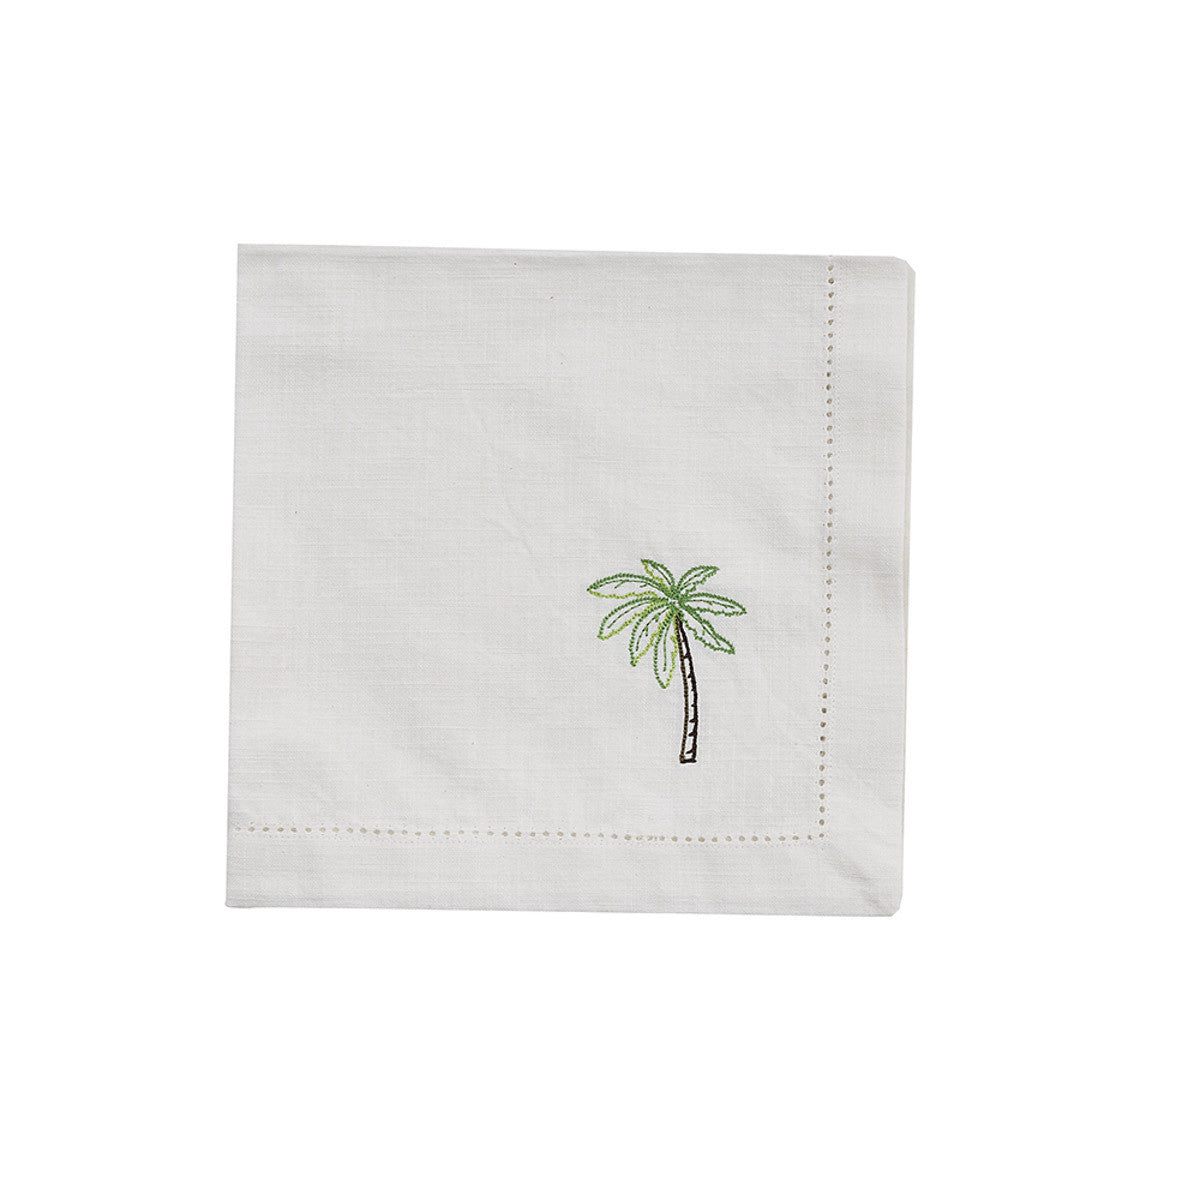 Embroidered Napkin - Palm Tree Set of 4  Park Designs